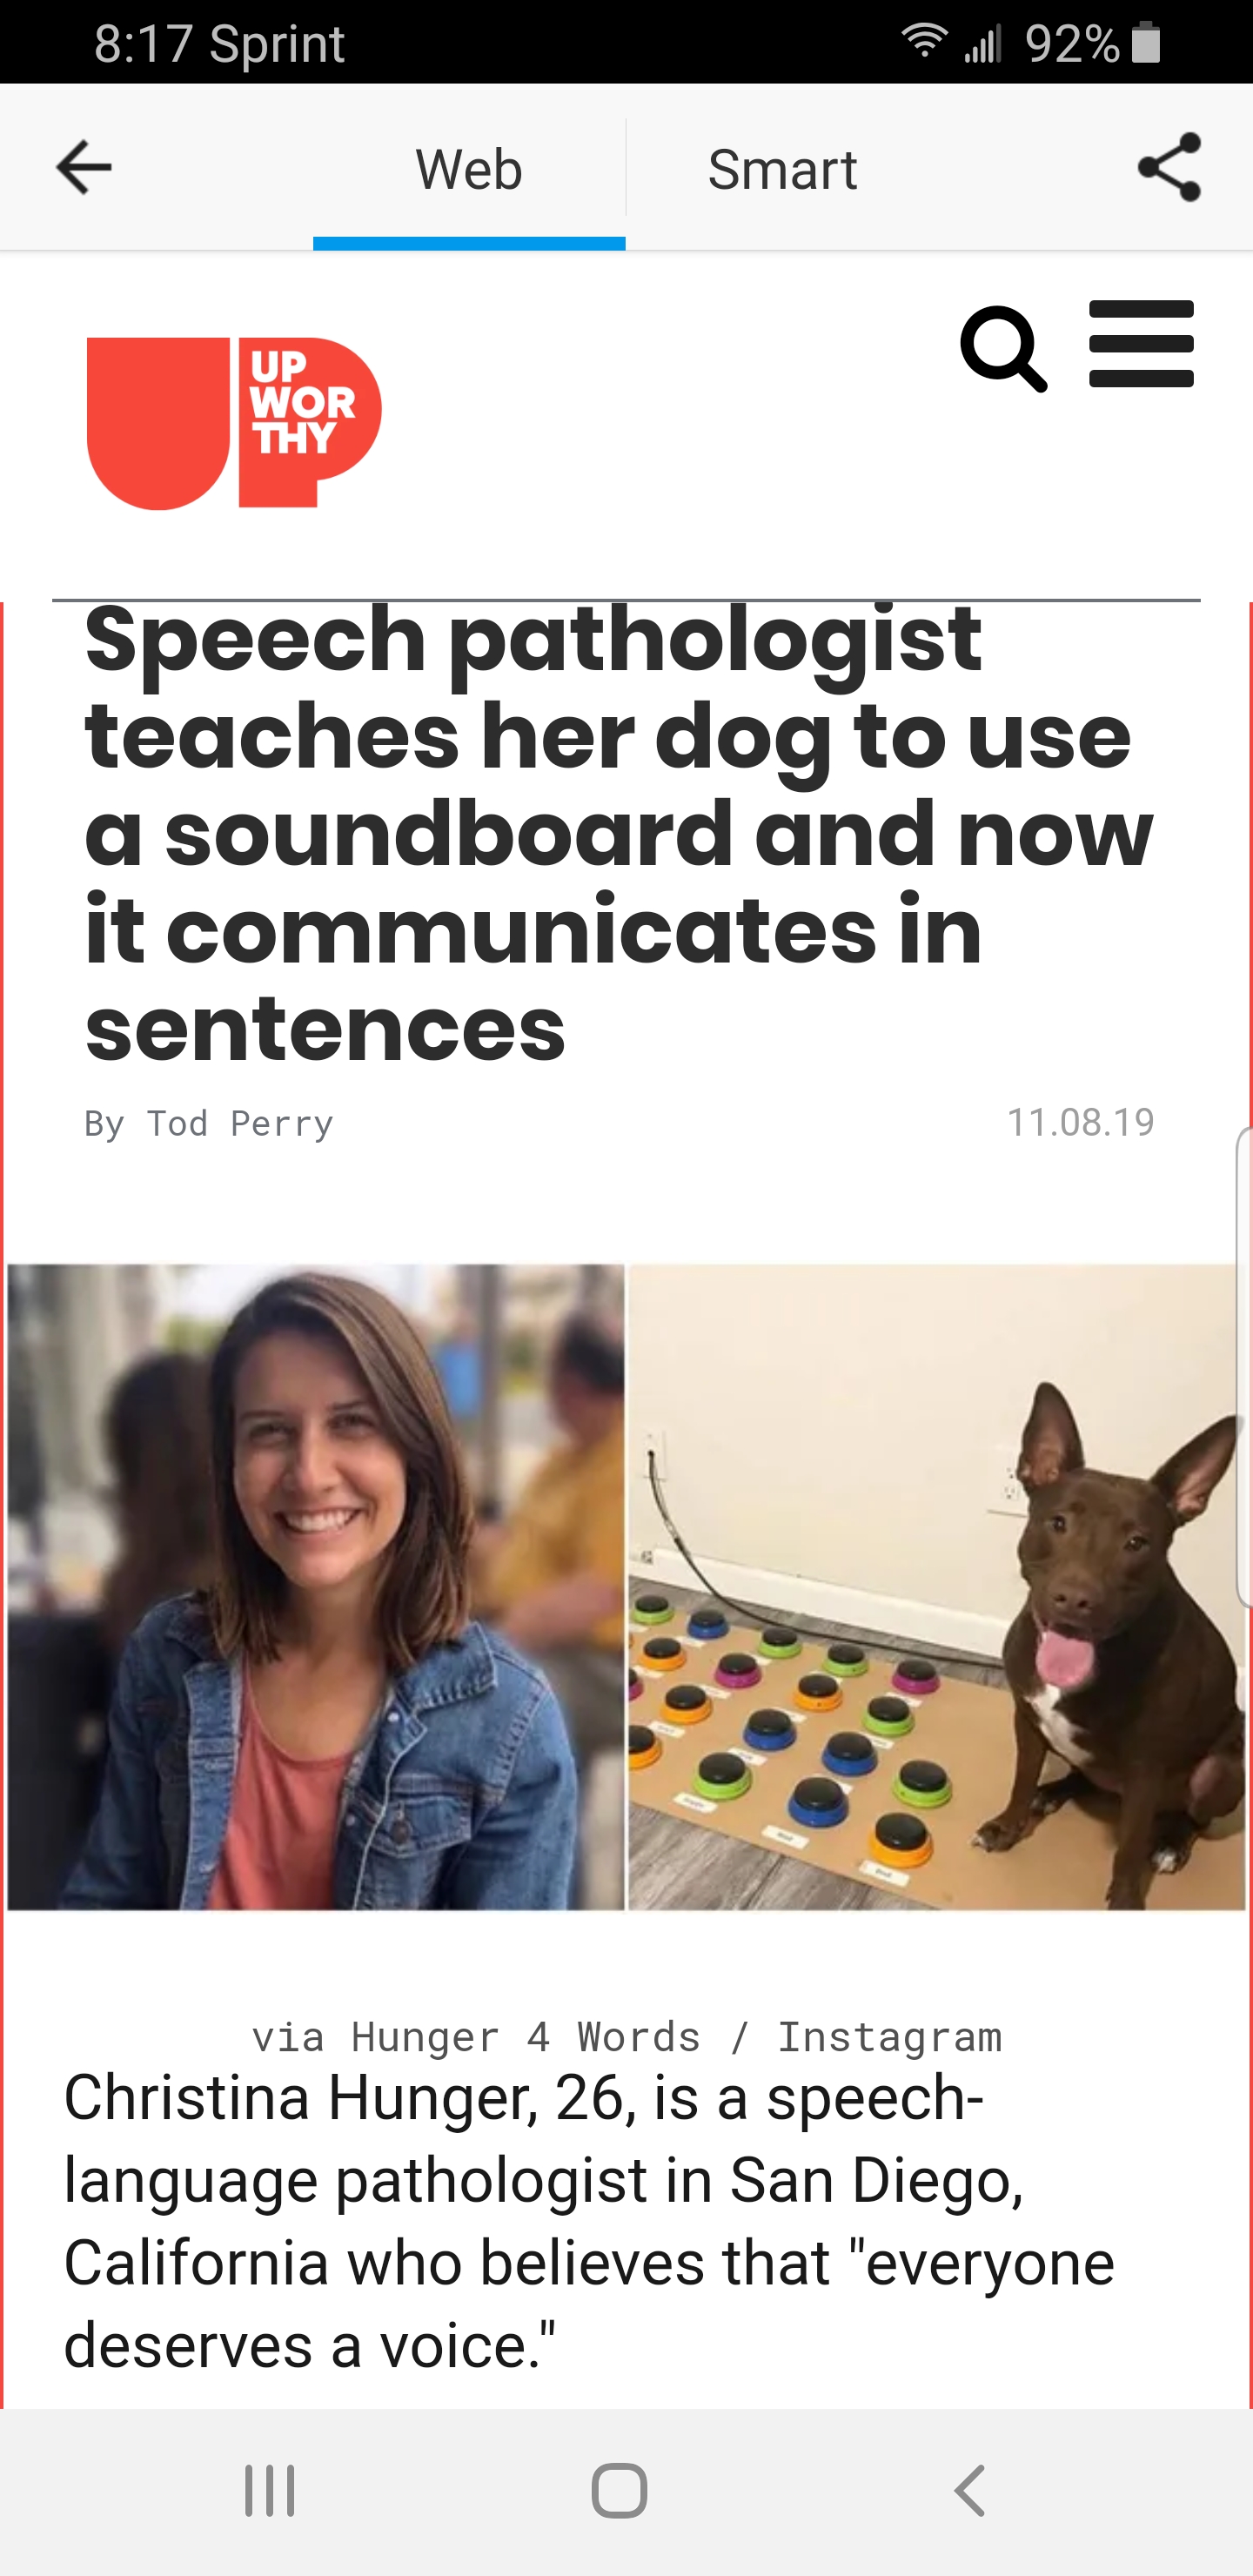 Sprint 9.4 92% Web Smart Q Speech pathologist teaches her dog to use a soundboard and now it communicates in sentences Dy Tod Perry 11 010 via Hunger 4 Words Instagram Christina Hunger, 26, is a speech language pathologist in San Diego, California who…